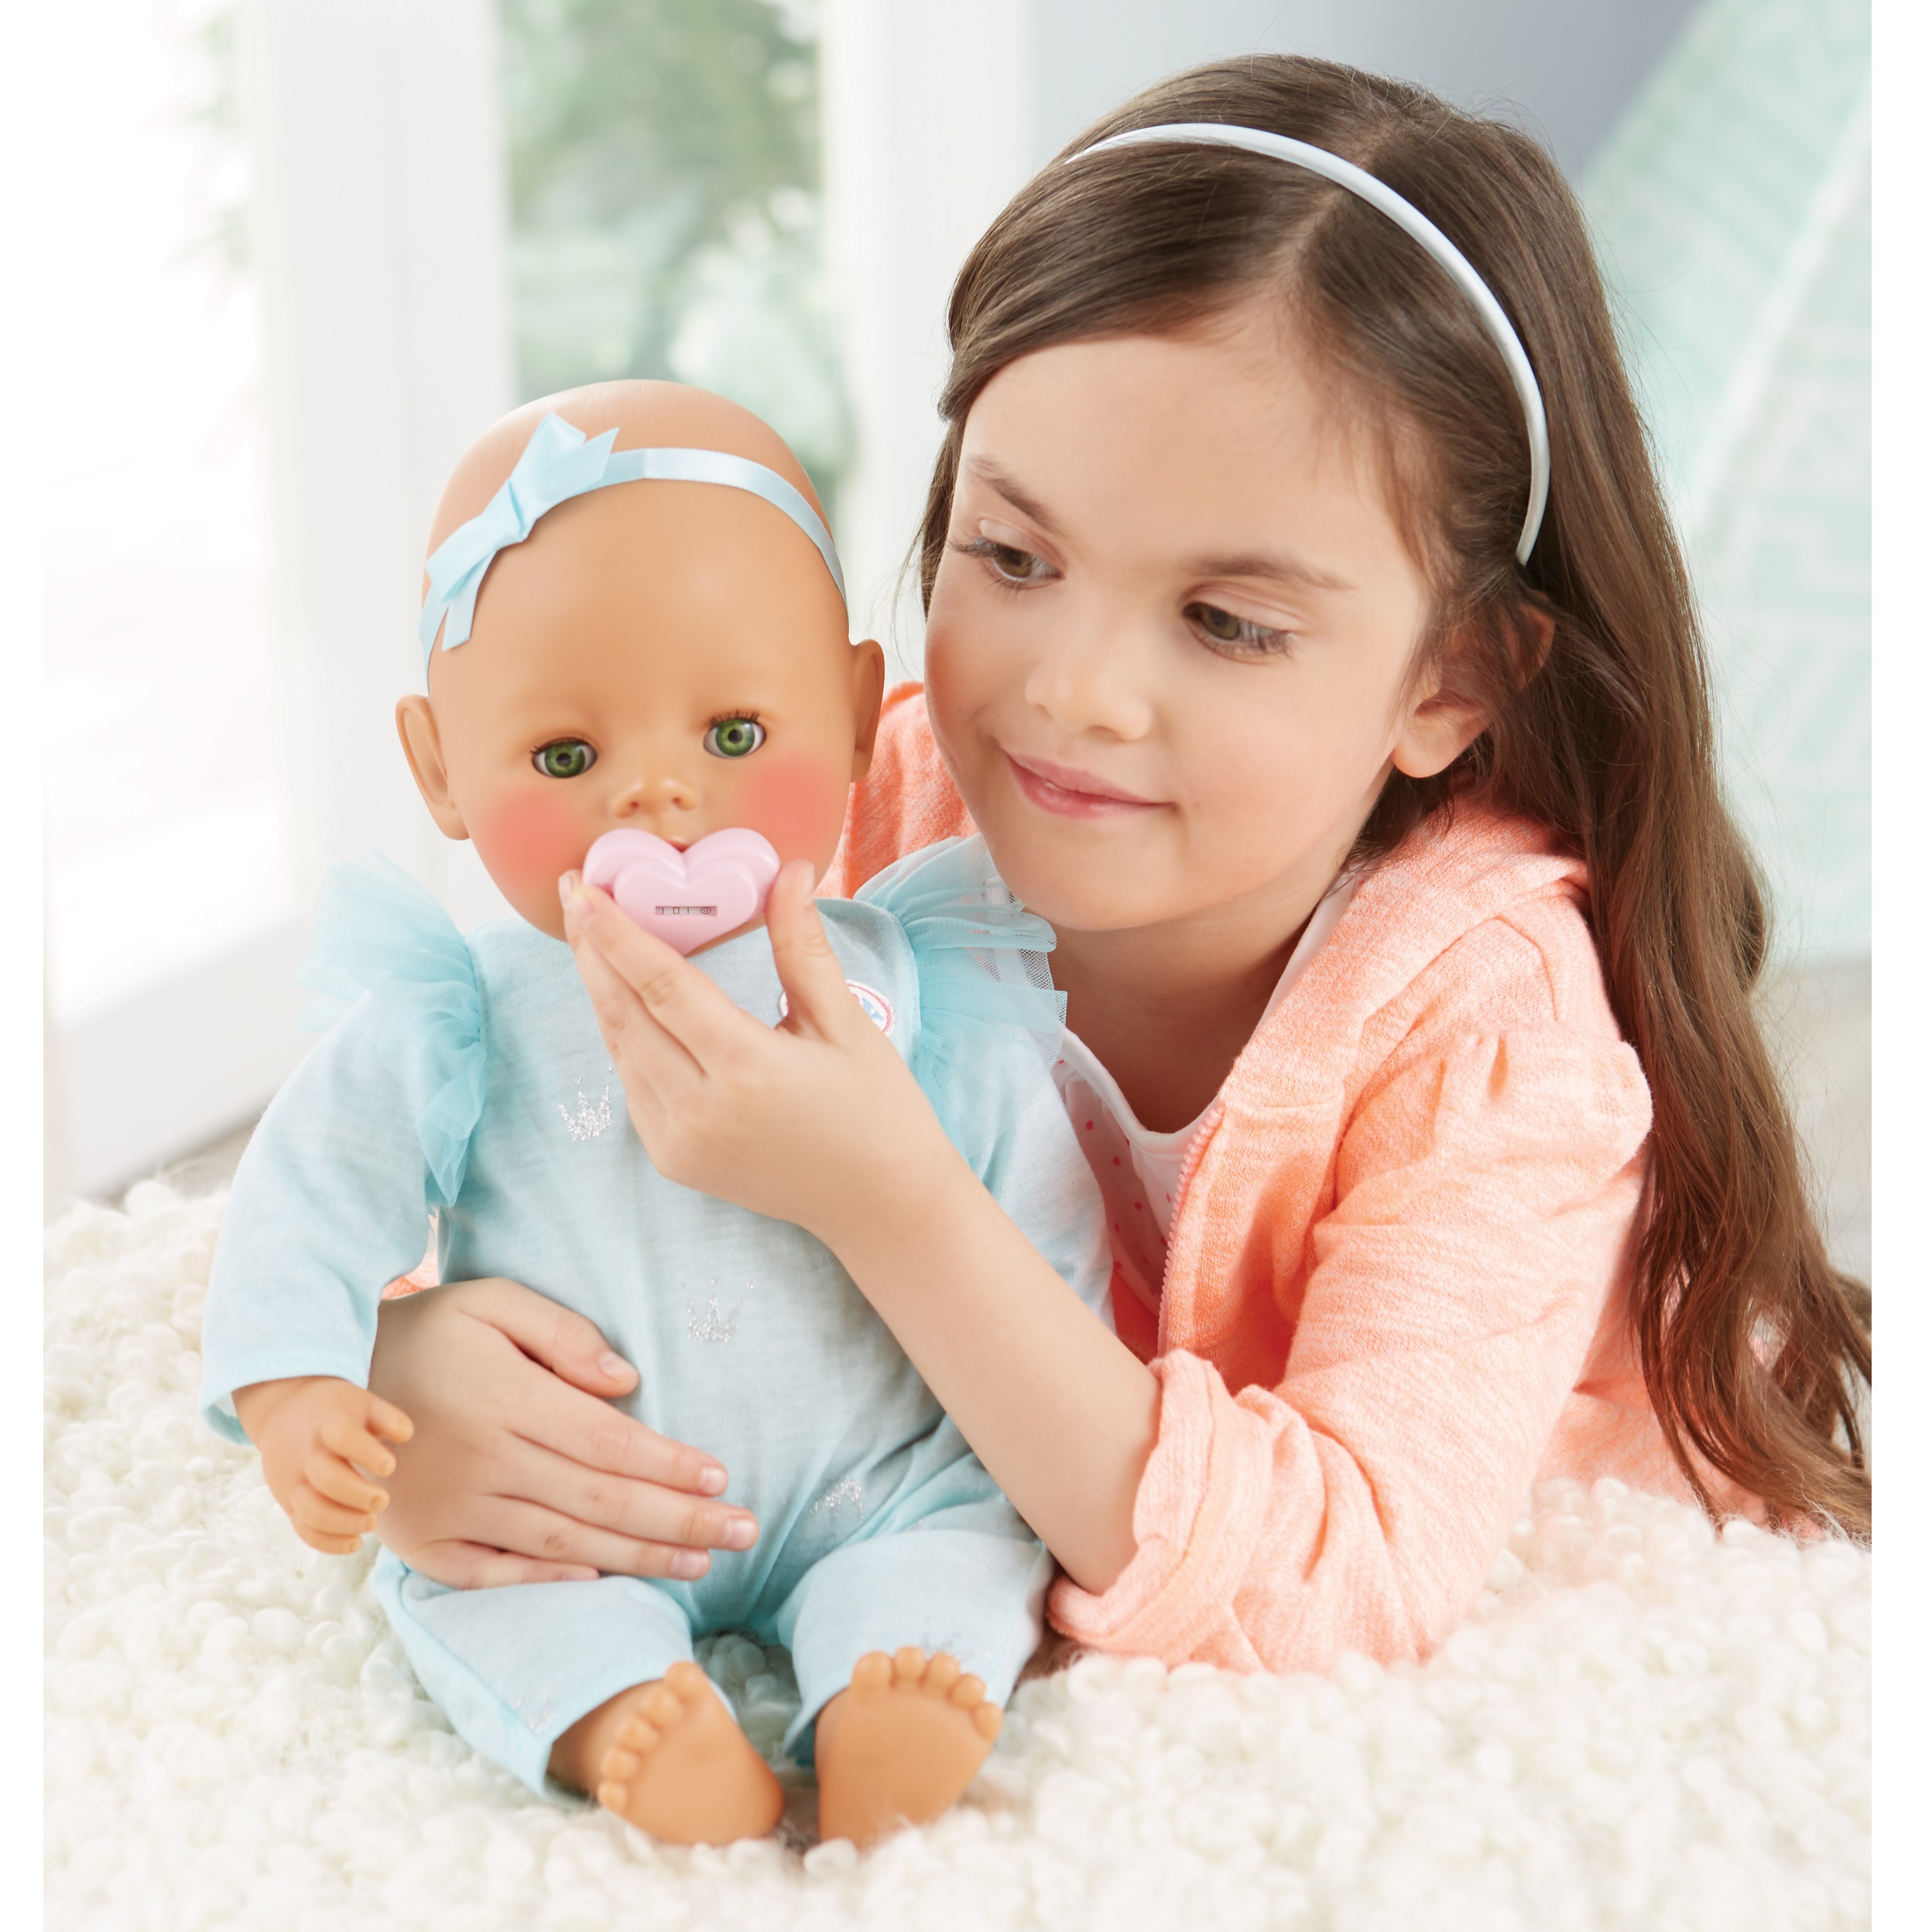 Baby Born - Mommy Make Me Better - Interactive Doll - Green Eyes - image 5 of 7